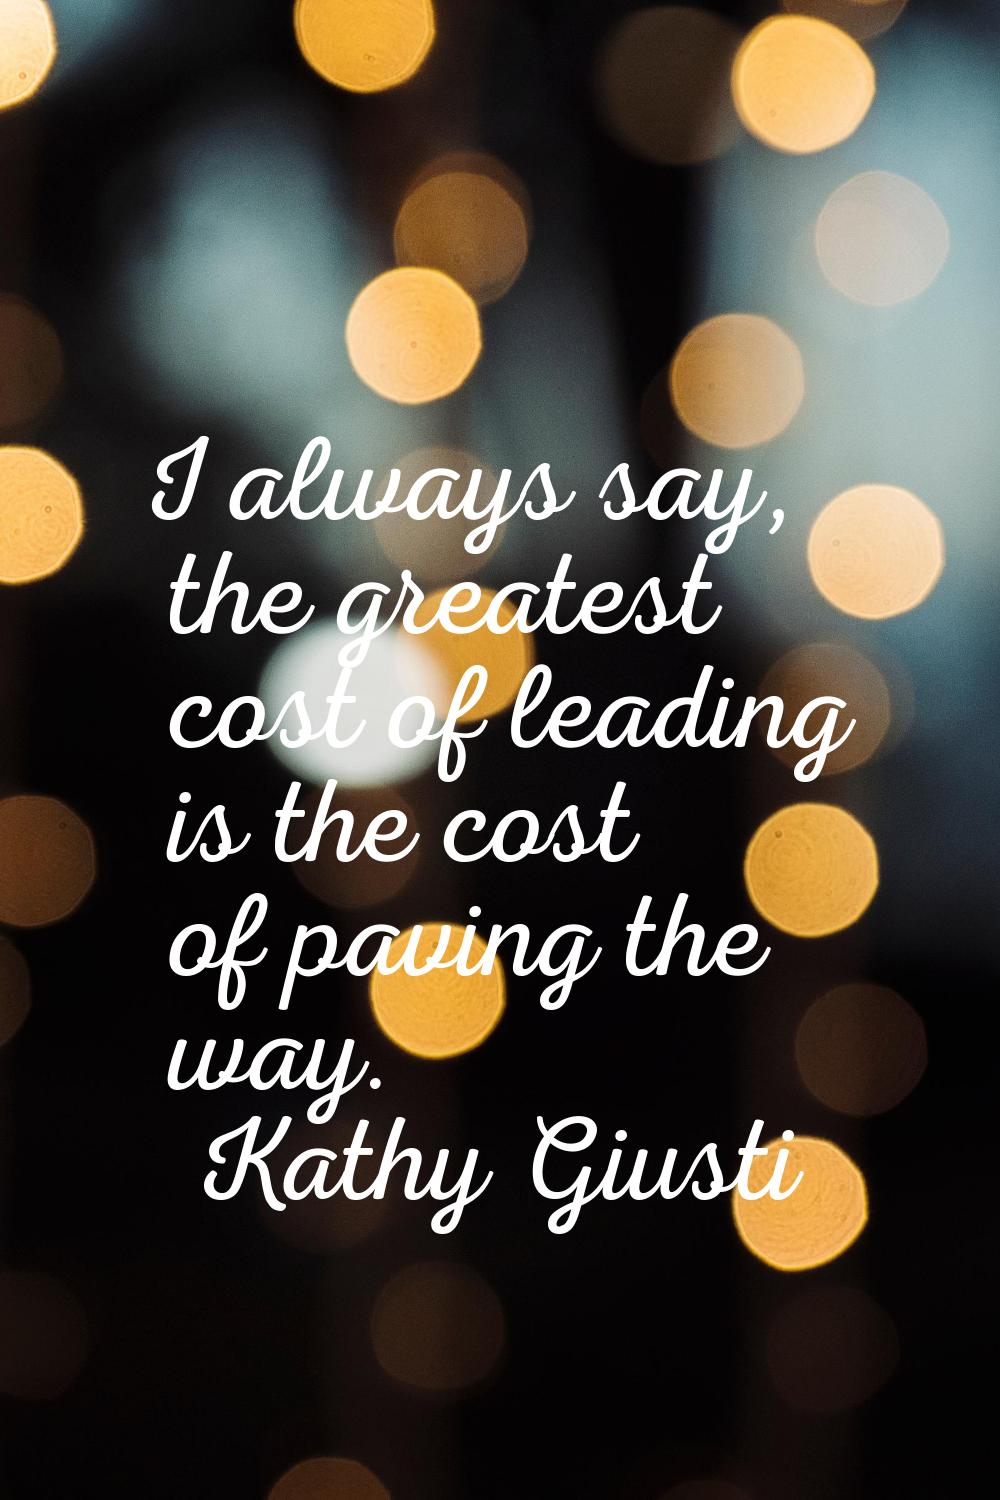 I always say, the greatest cost of leading is the cost of paving the way.